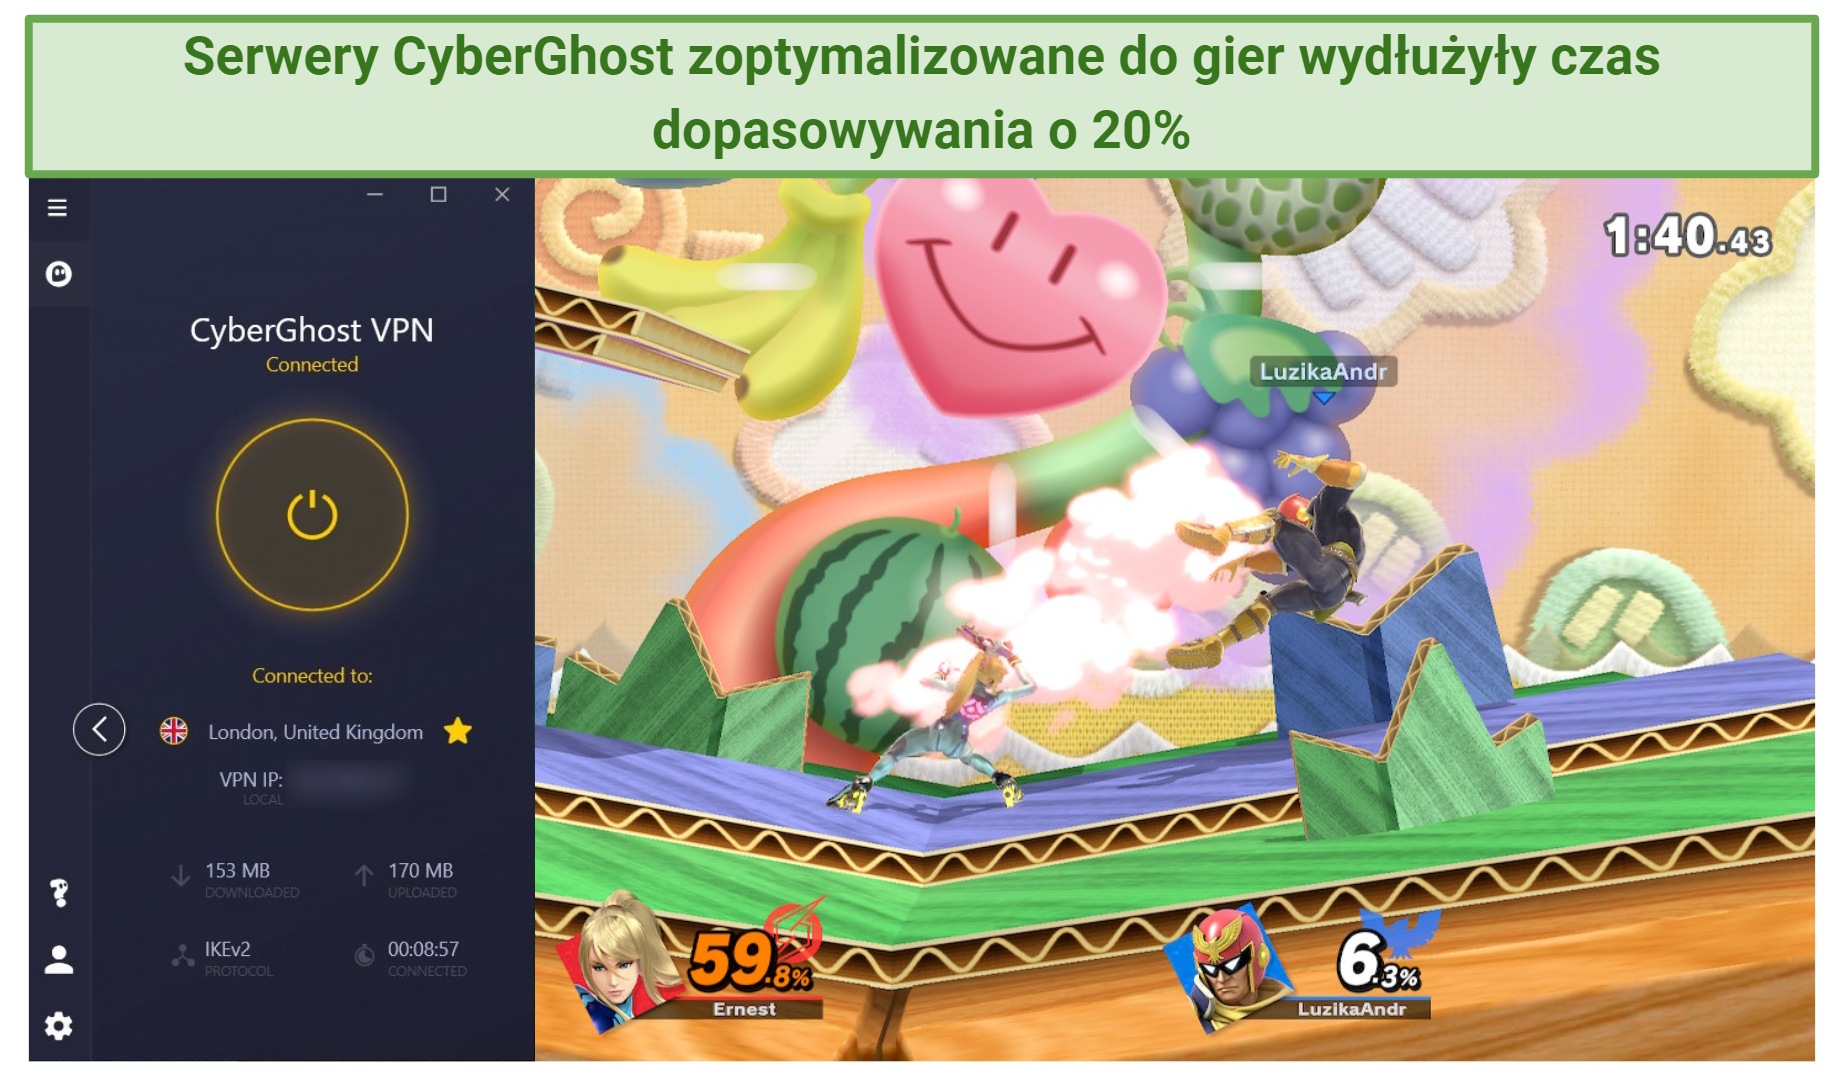 Screenshot of CyberGhost VPN working well with Super Smash Bros. Ultimate